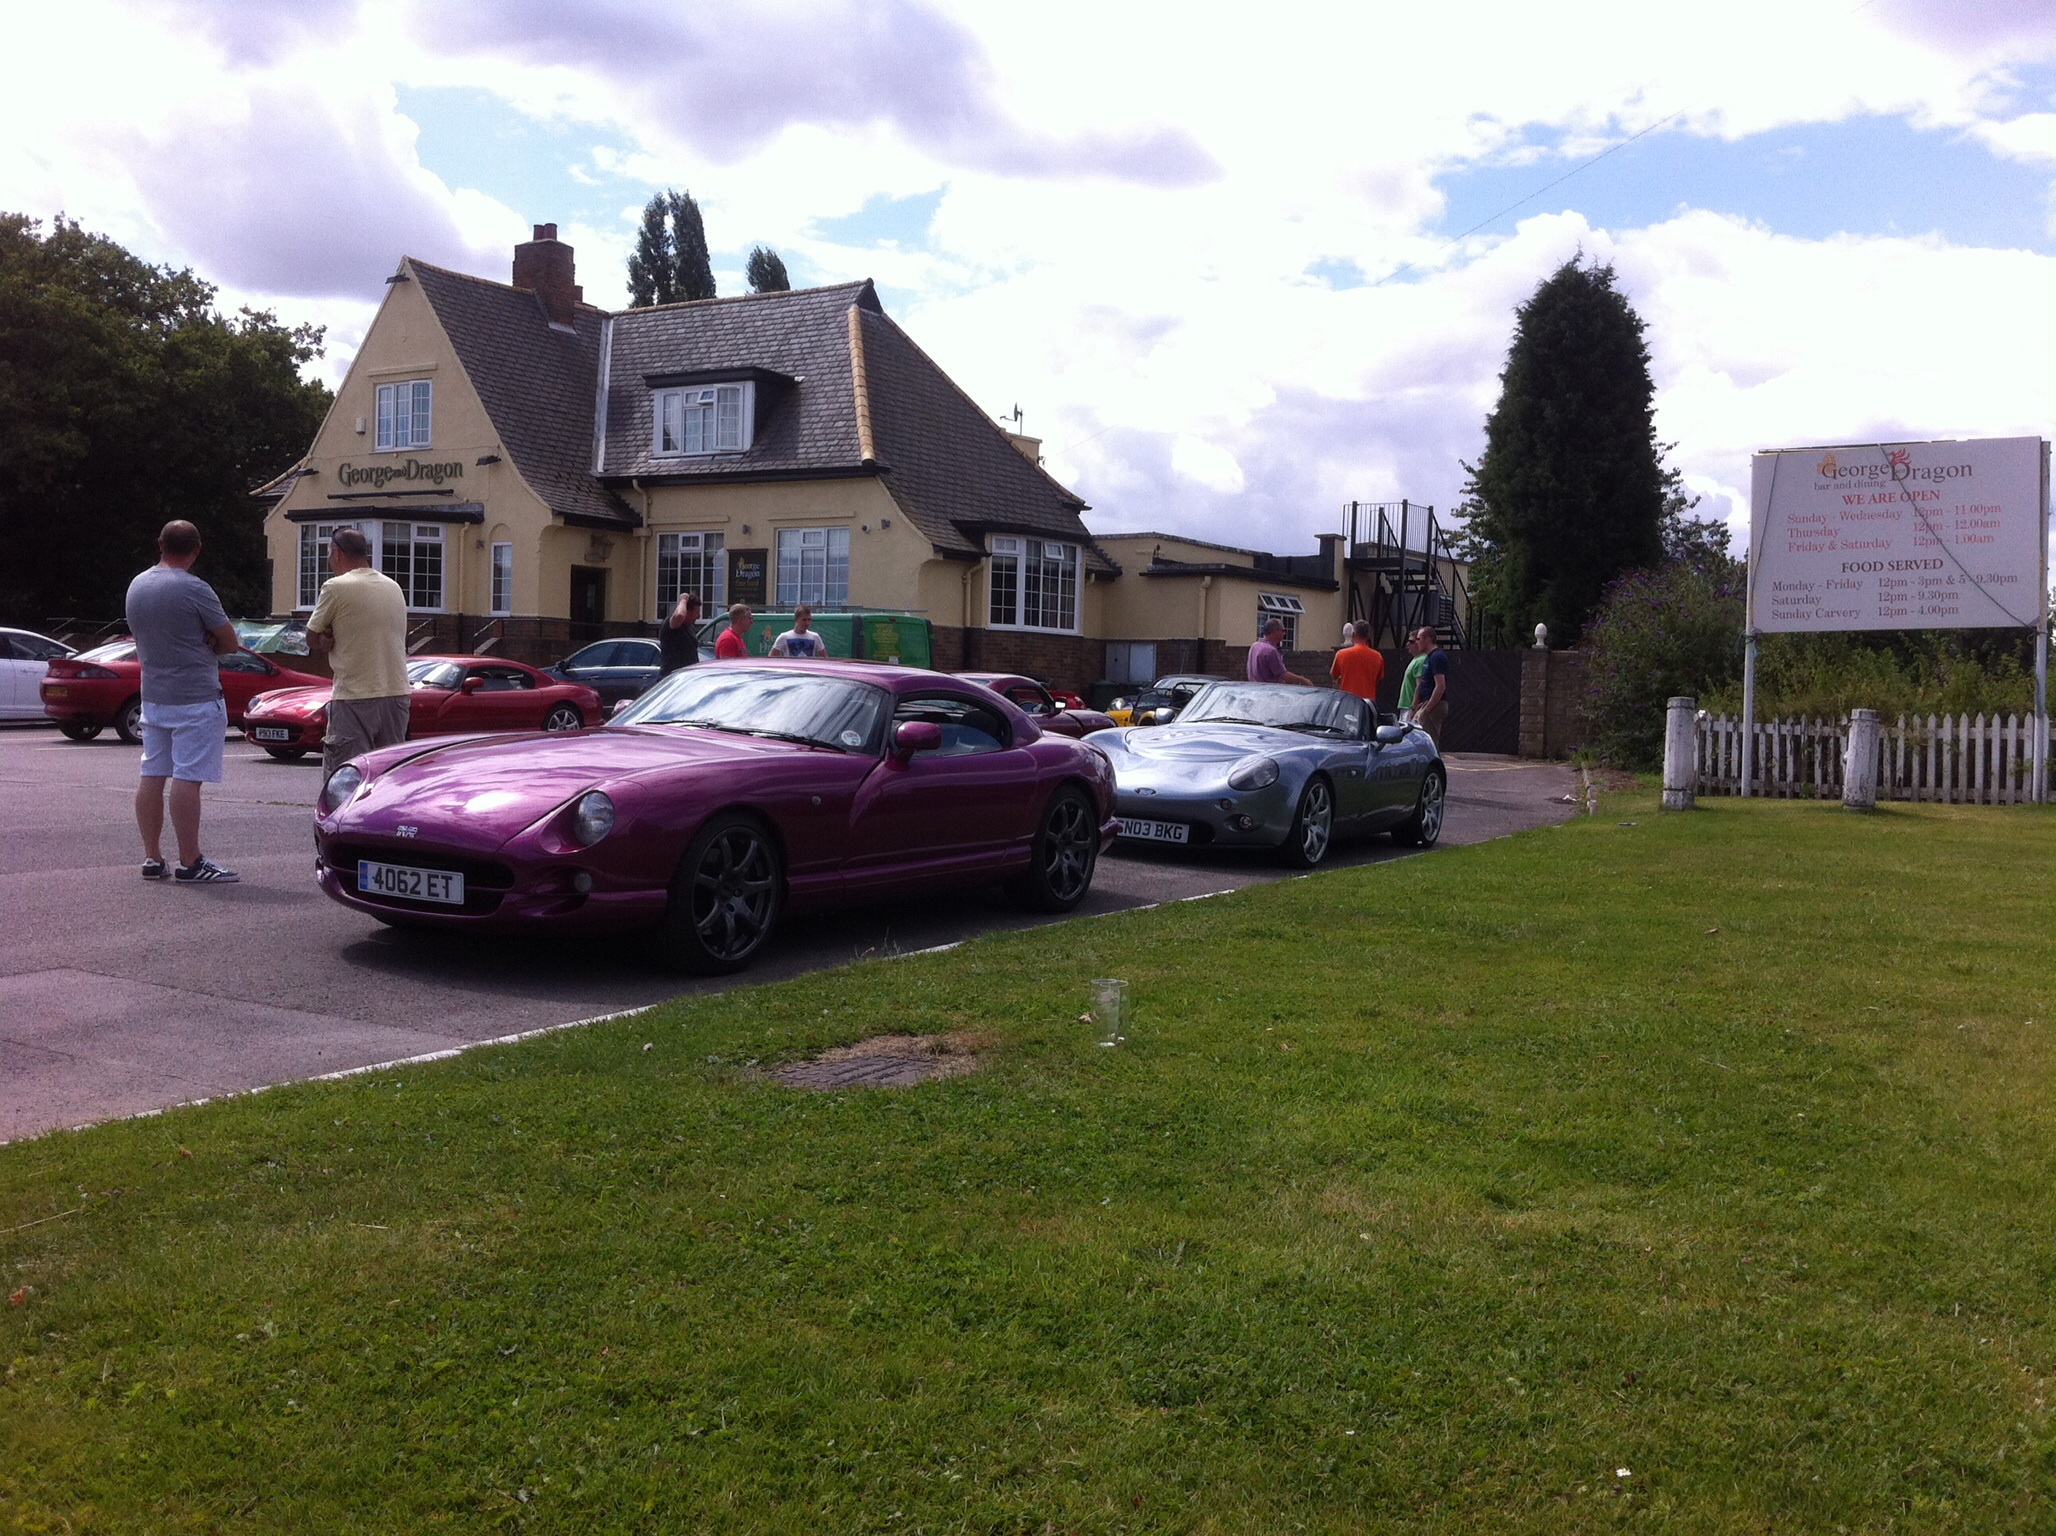 A red car parked in front of a house - Pistonheads